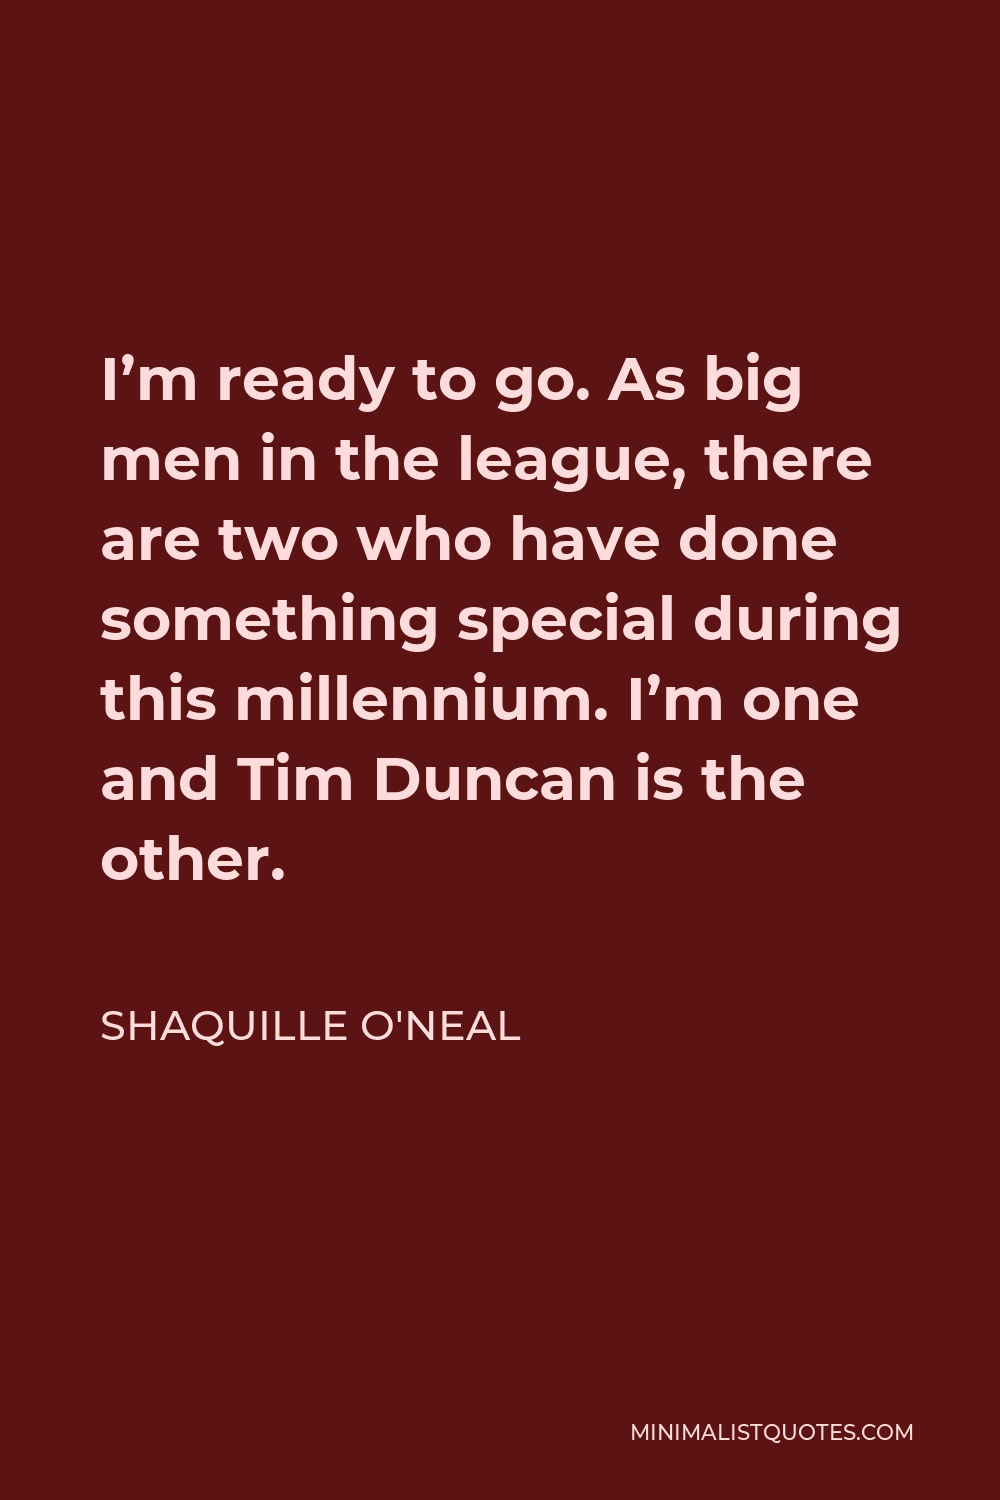 Shaquille O'Neal Quote - I’m ready to go. As big men in the league, there are two who have done something special during this millennium. I’m one and Tim Duncan is the other.